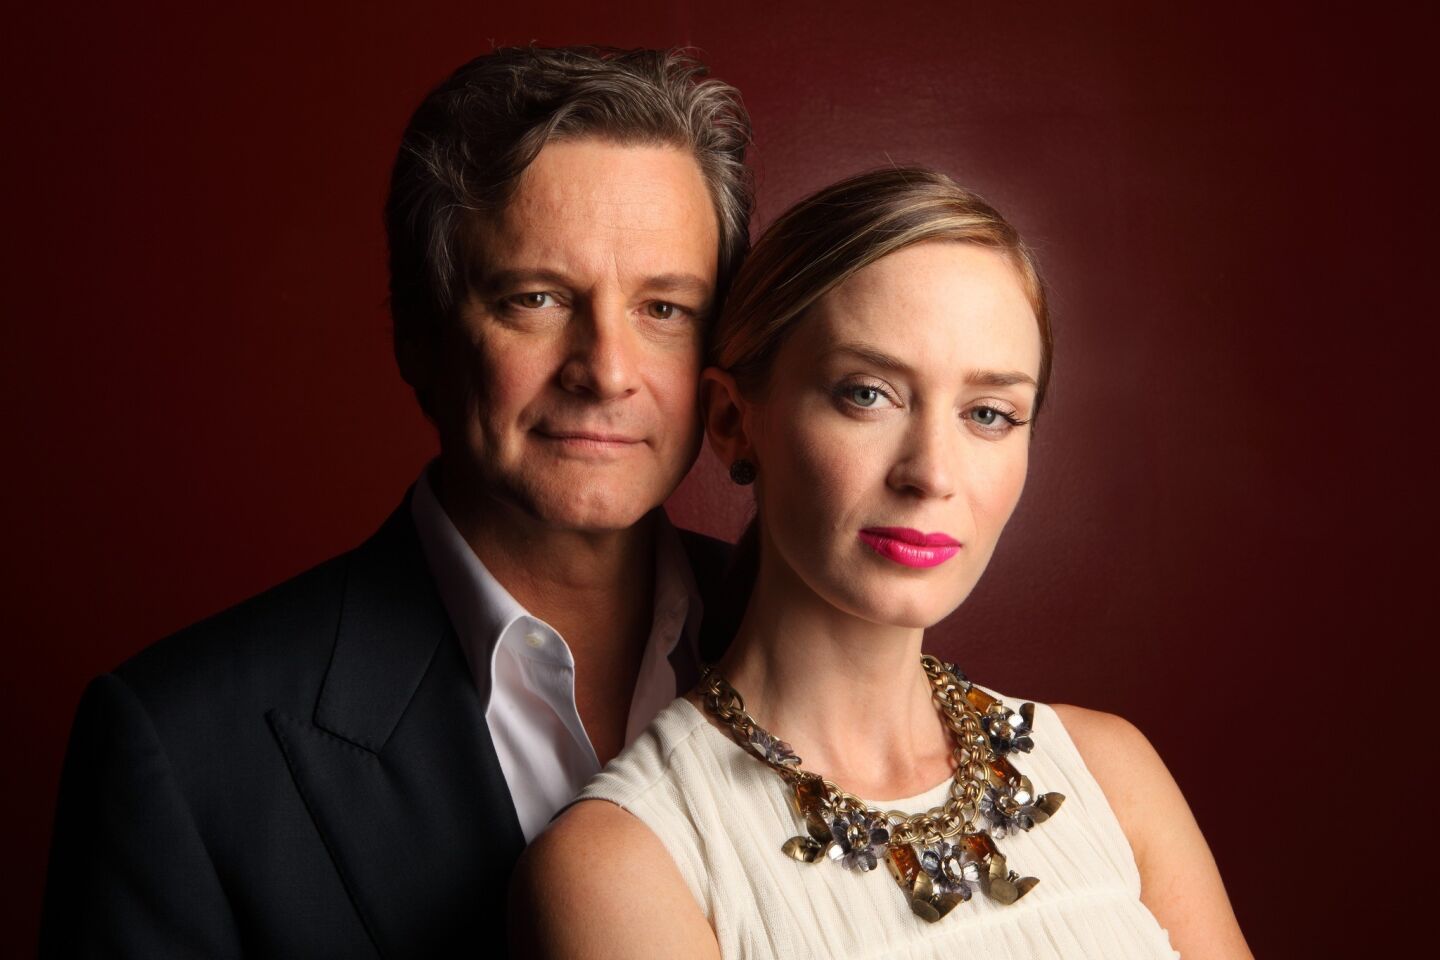 Colin Firth and Emily Blunt